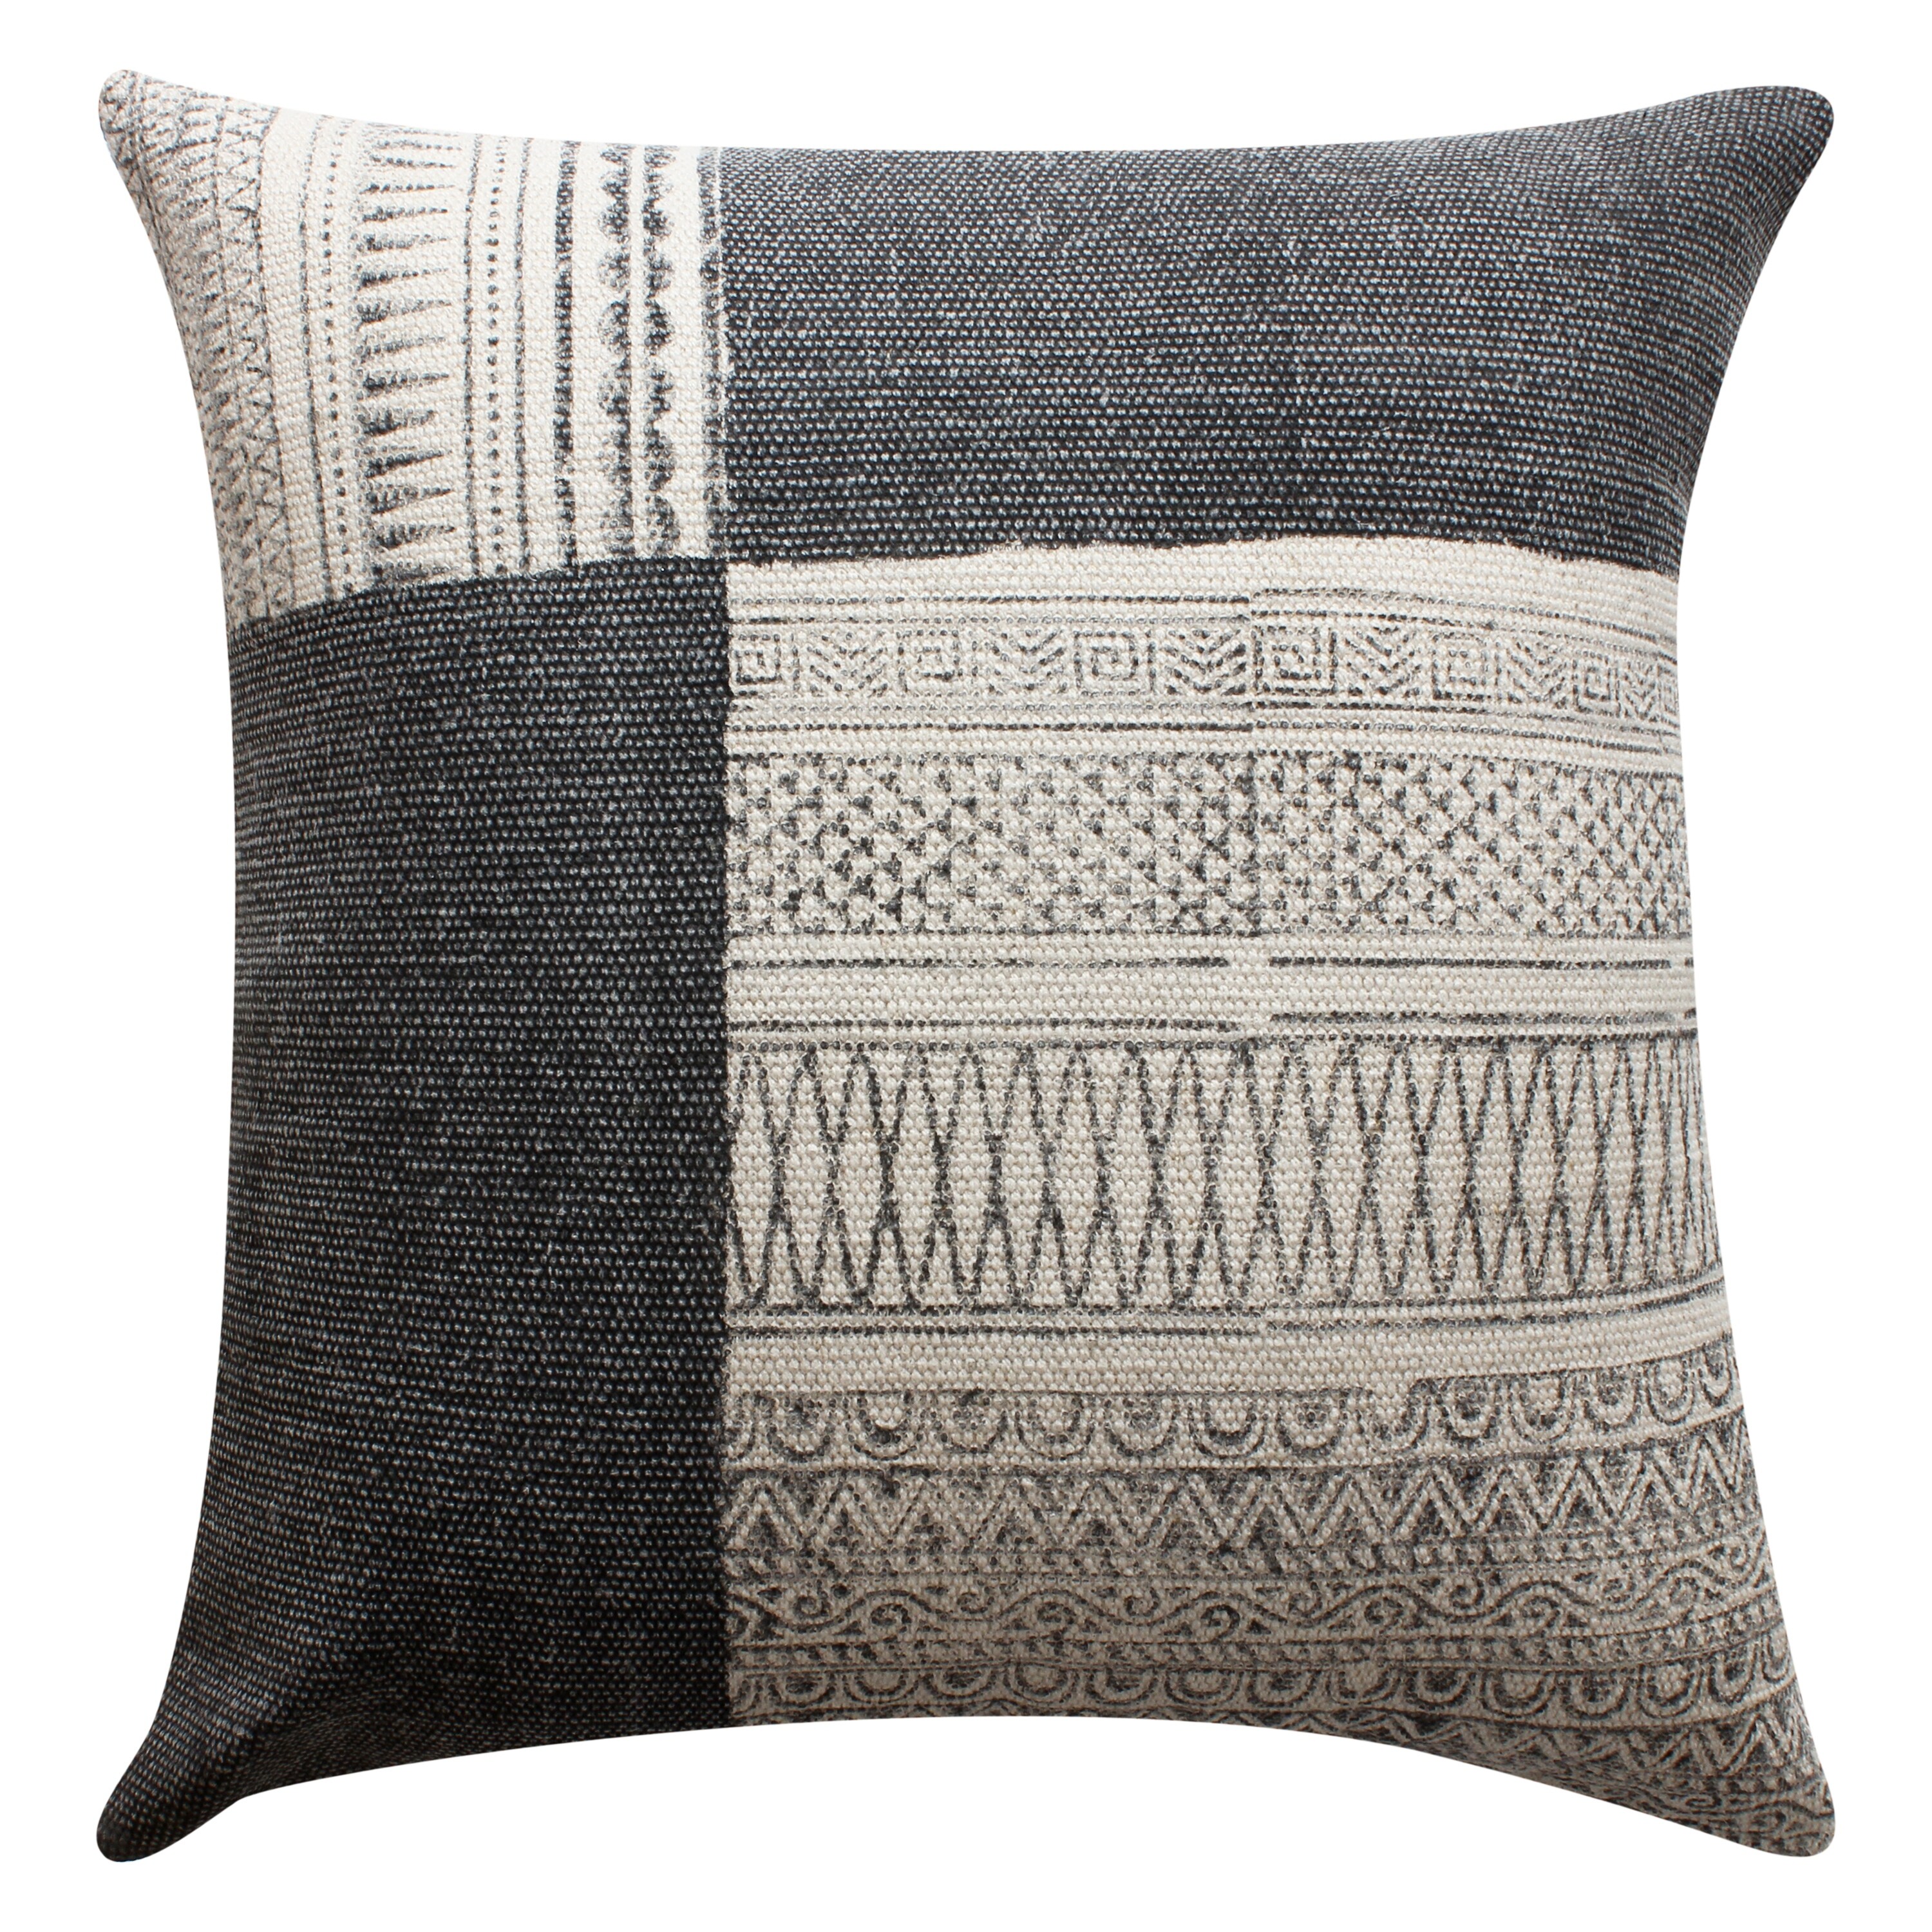 17 x 17 Inch Square Cotton Accent Throw Pillows, Geometric Aztec